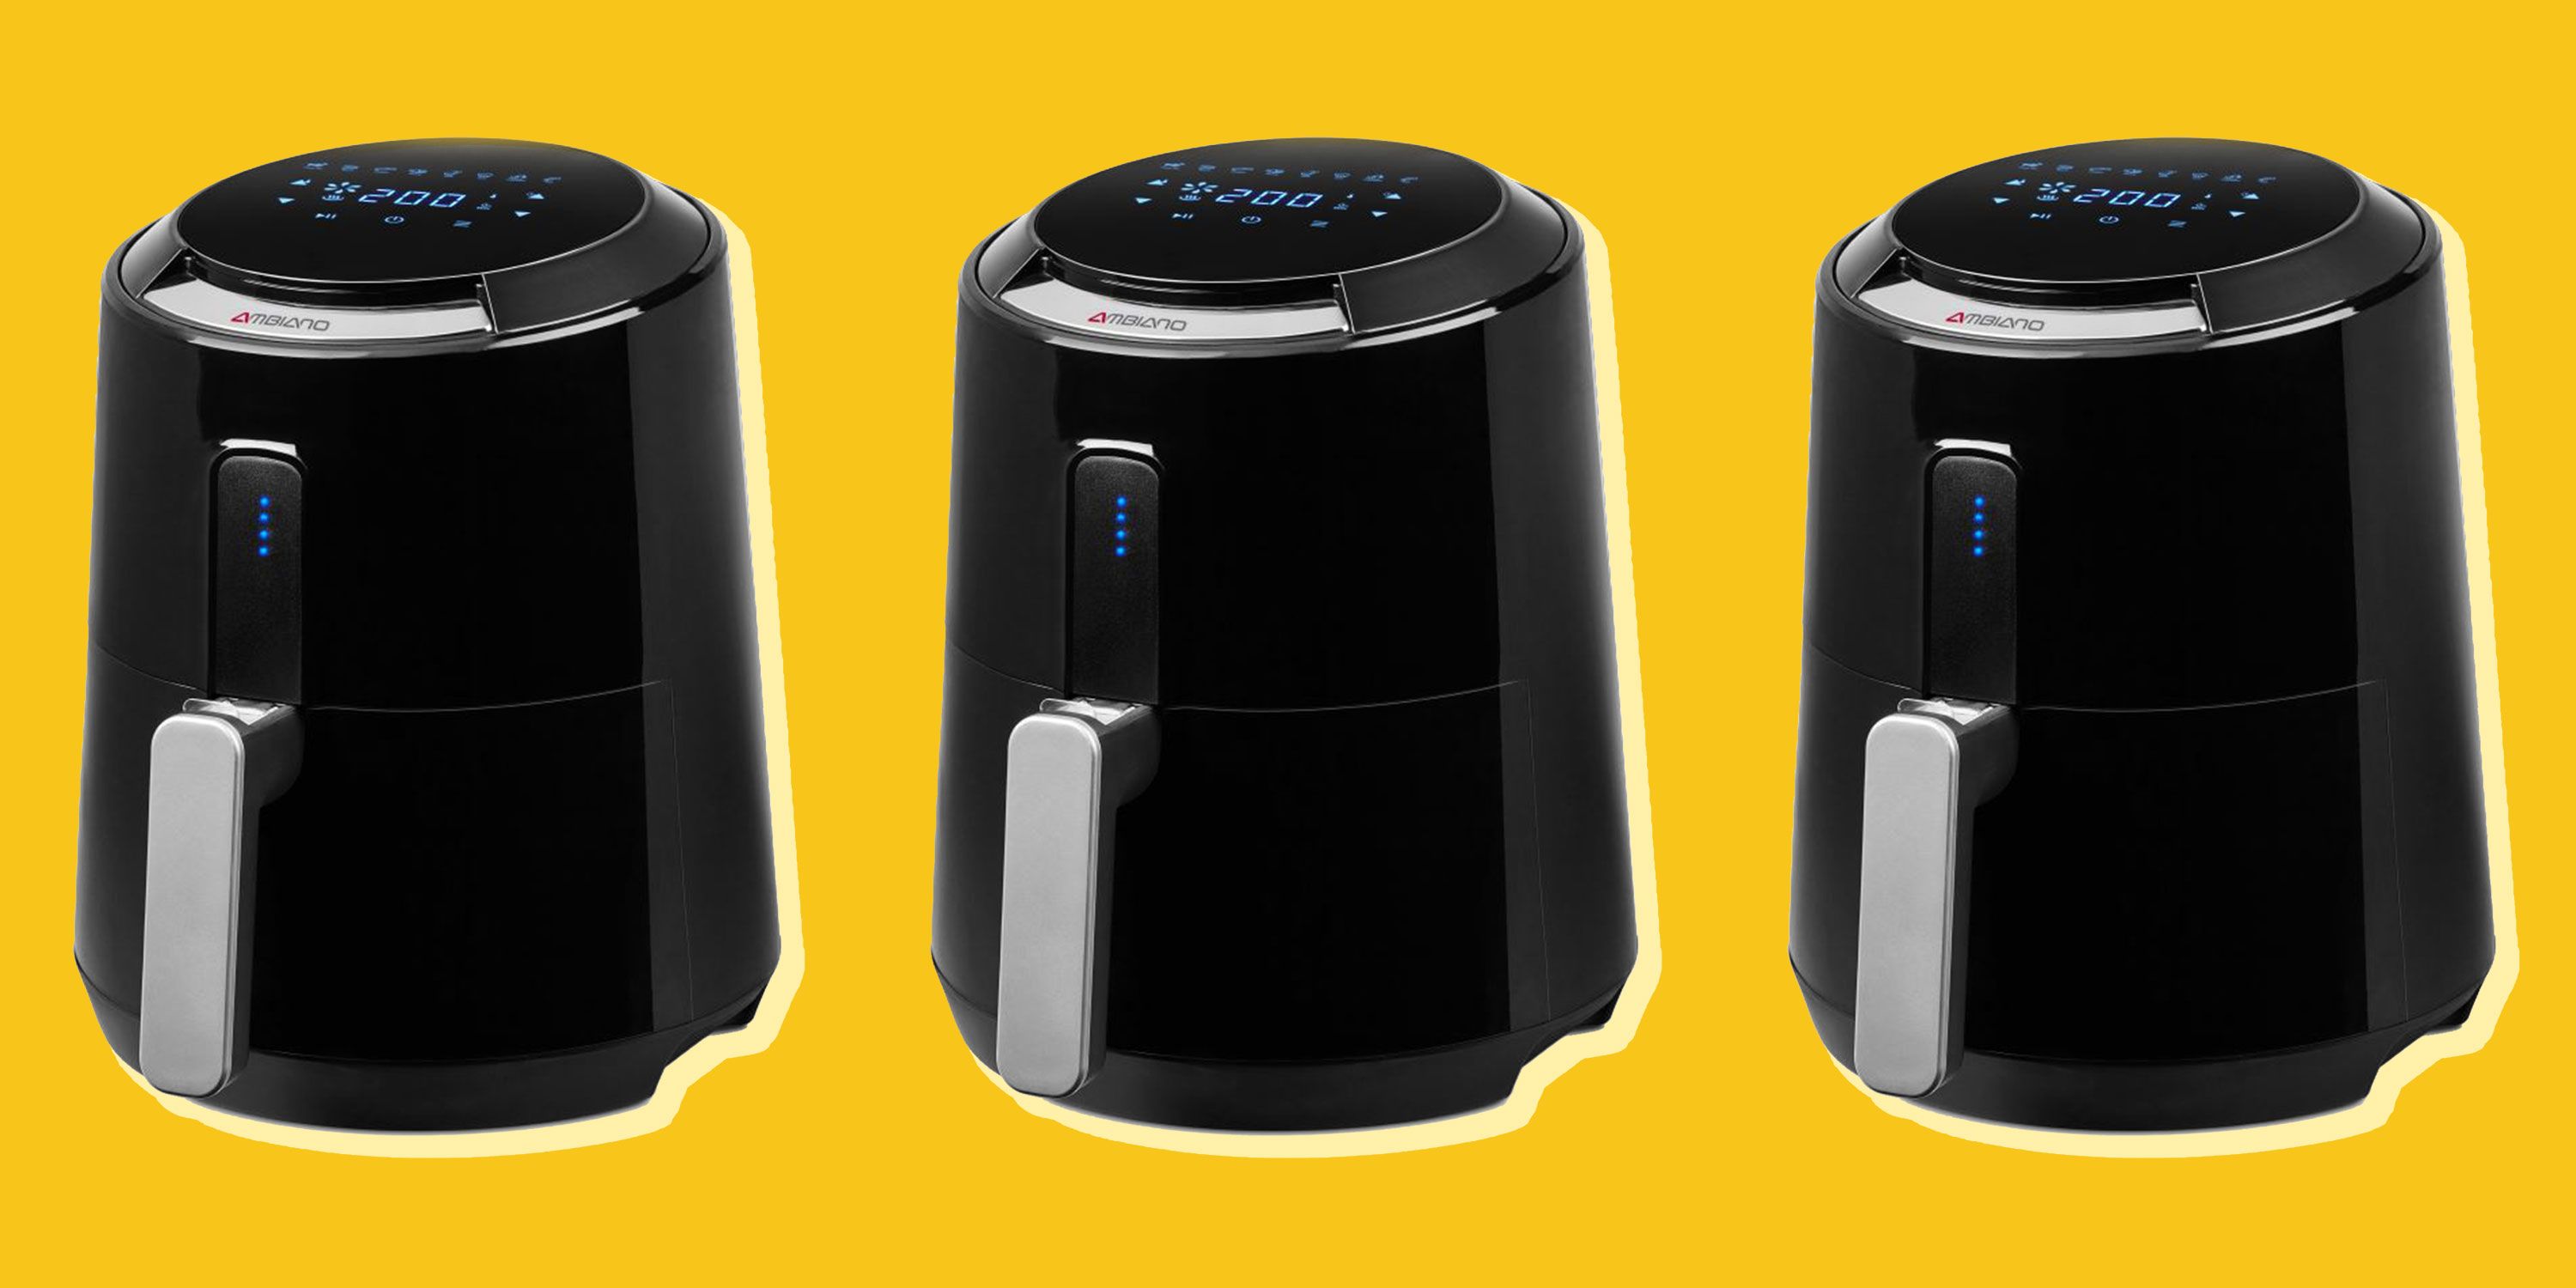 Aldi Is Selling A $50 Air Fryer For Just This Week - Aldi Finds For Kitchen  October 2018